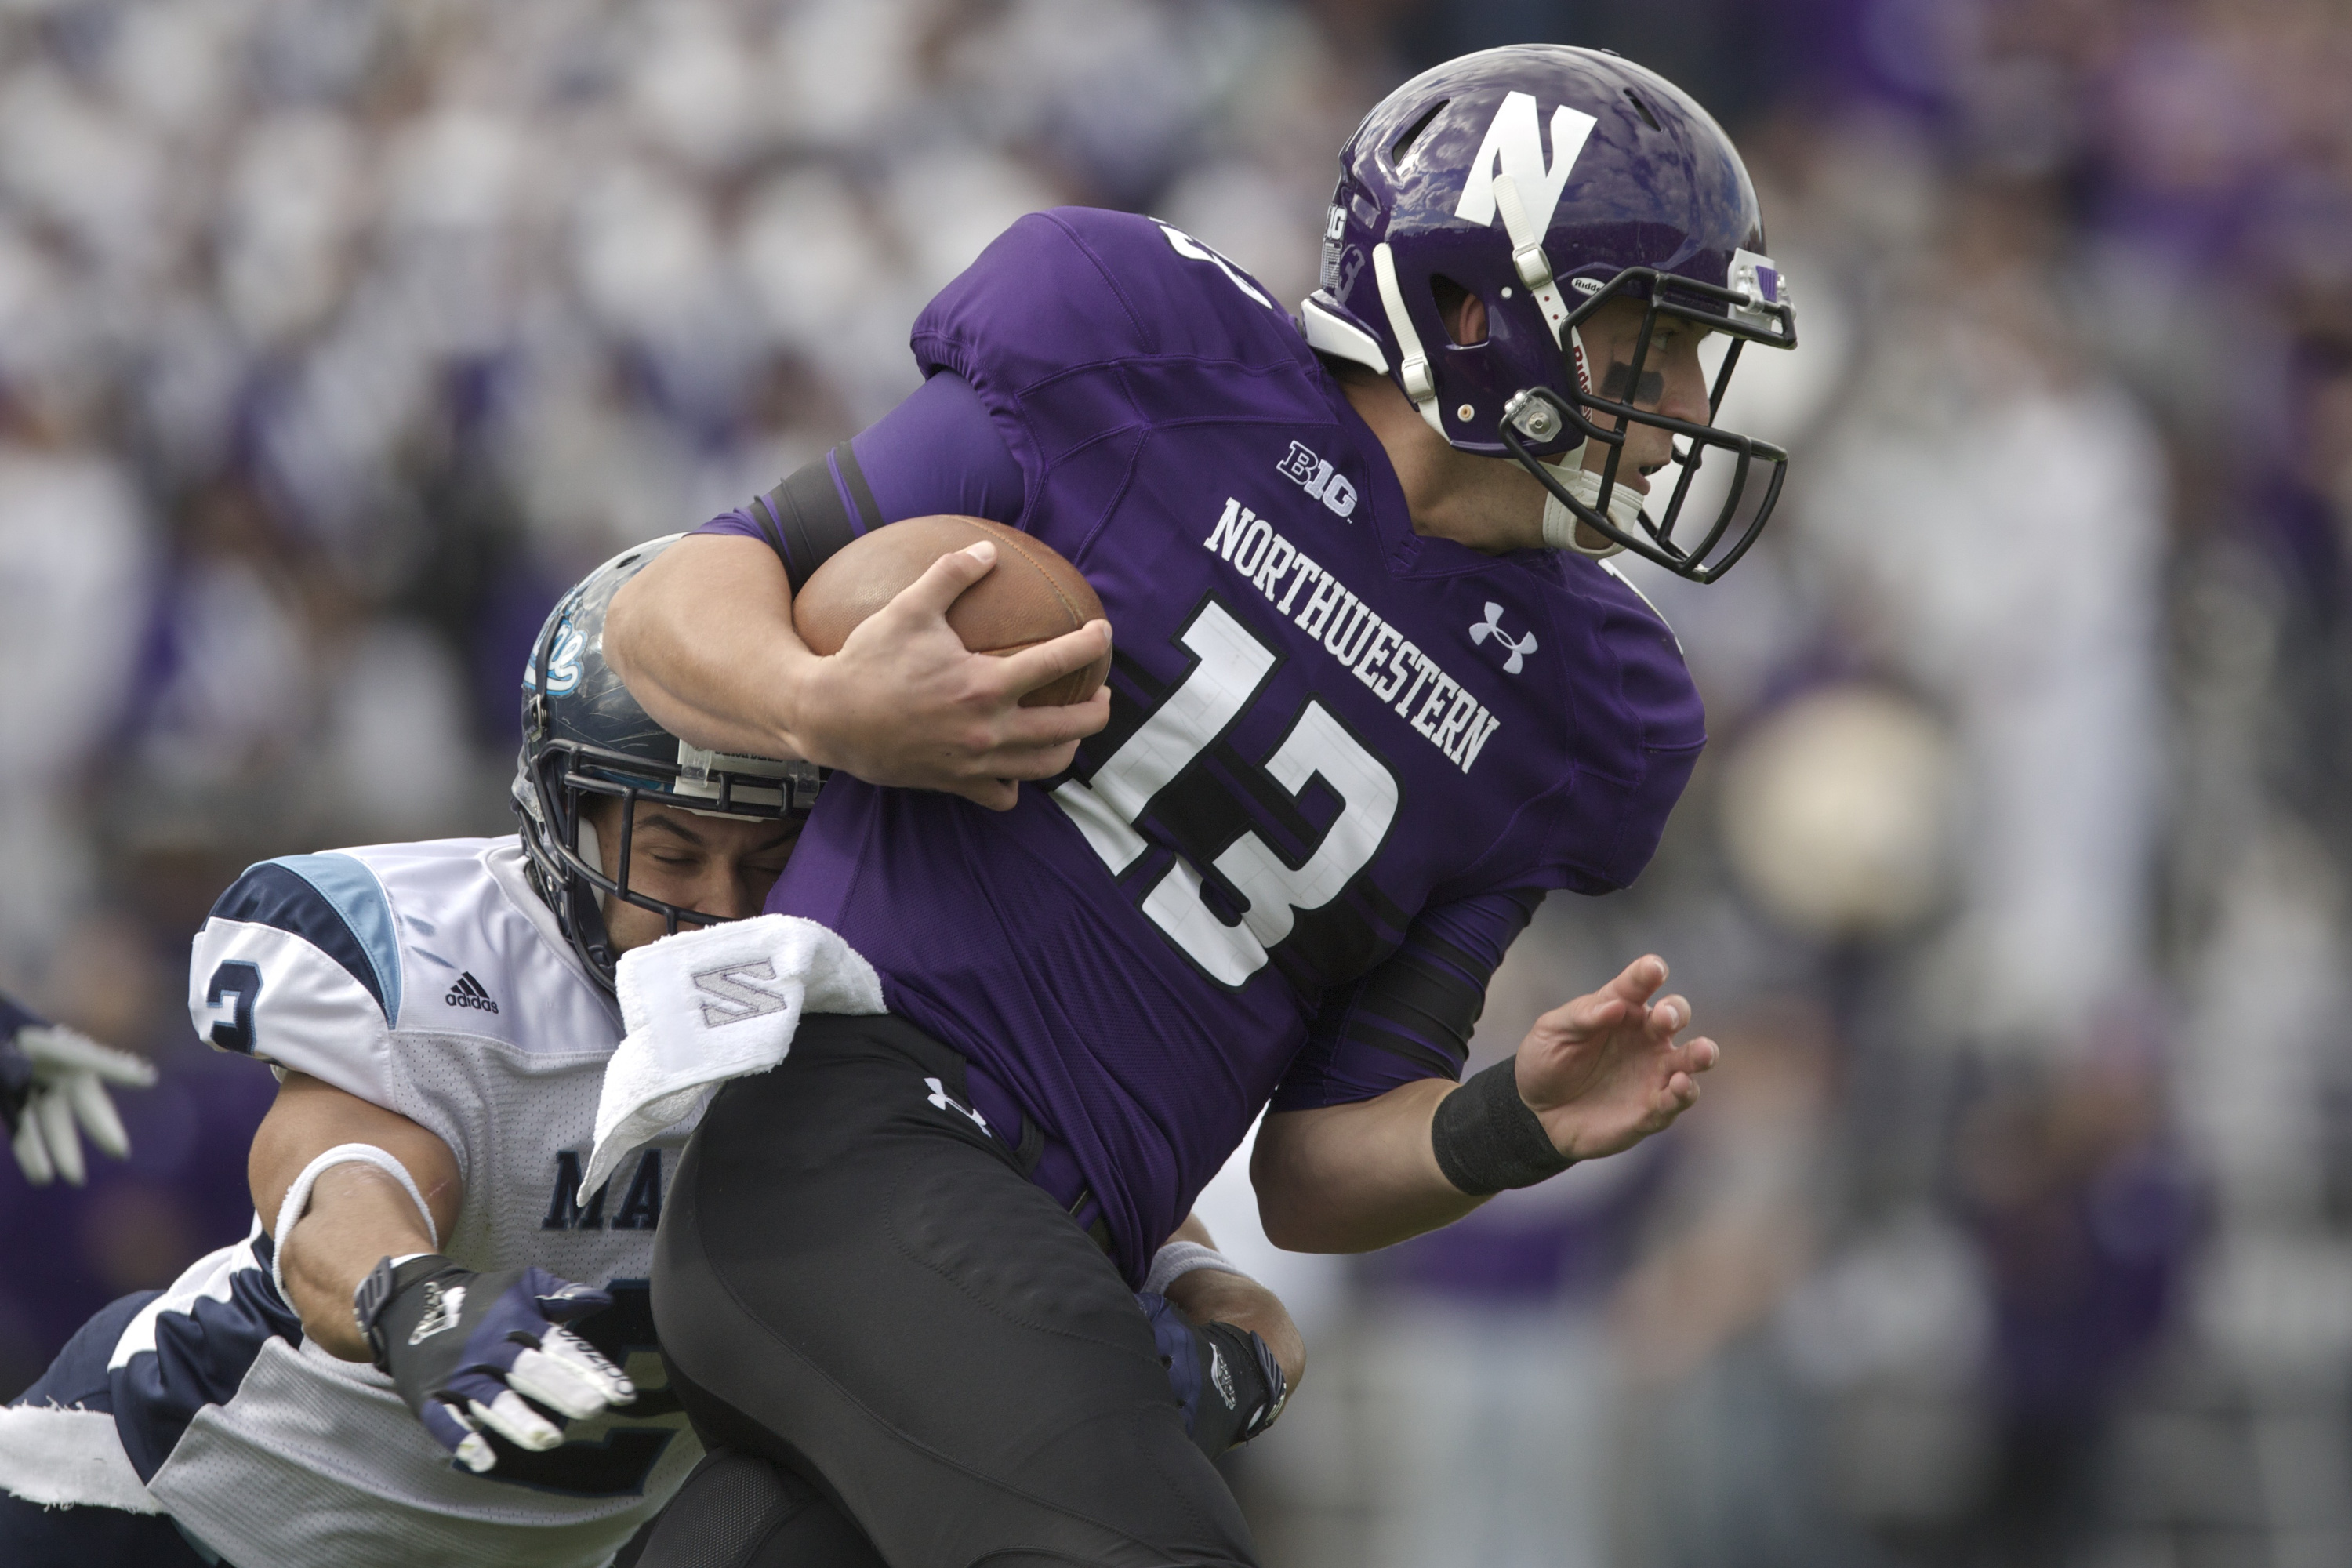 Cabrinni Goncalvesof the Maine Black Bears tackles Trevor Siemianof the Northwestern Wildcats during their college football game at Ryan Field on September 21, 2013 in Evanston, Illinois. (John Gress—Getty Images)